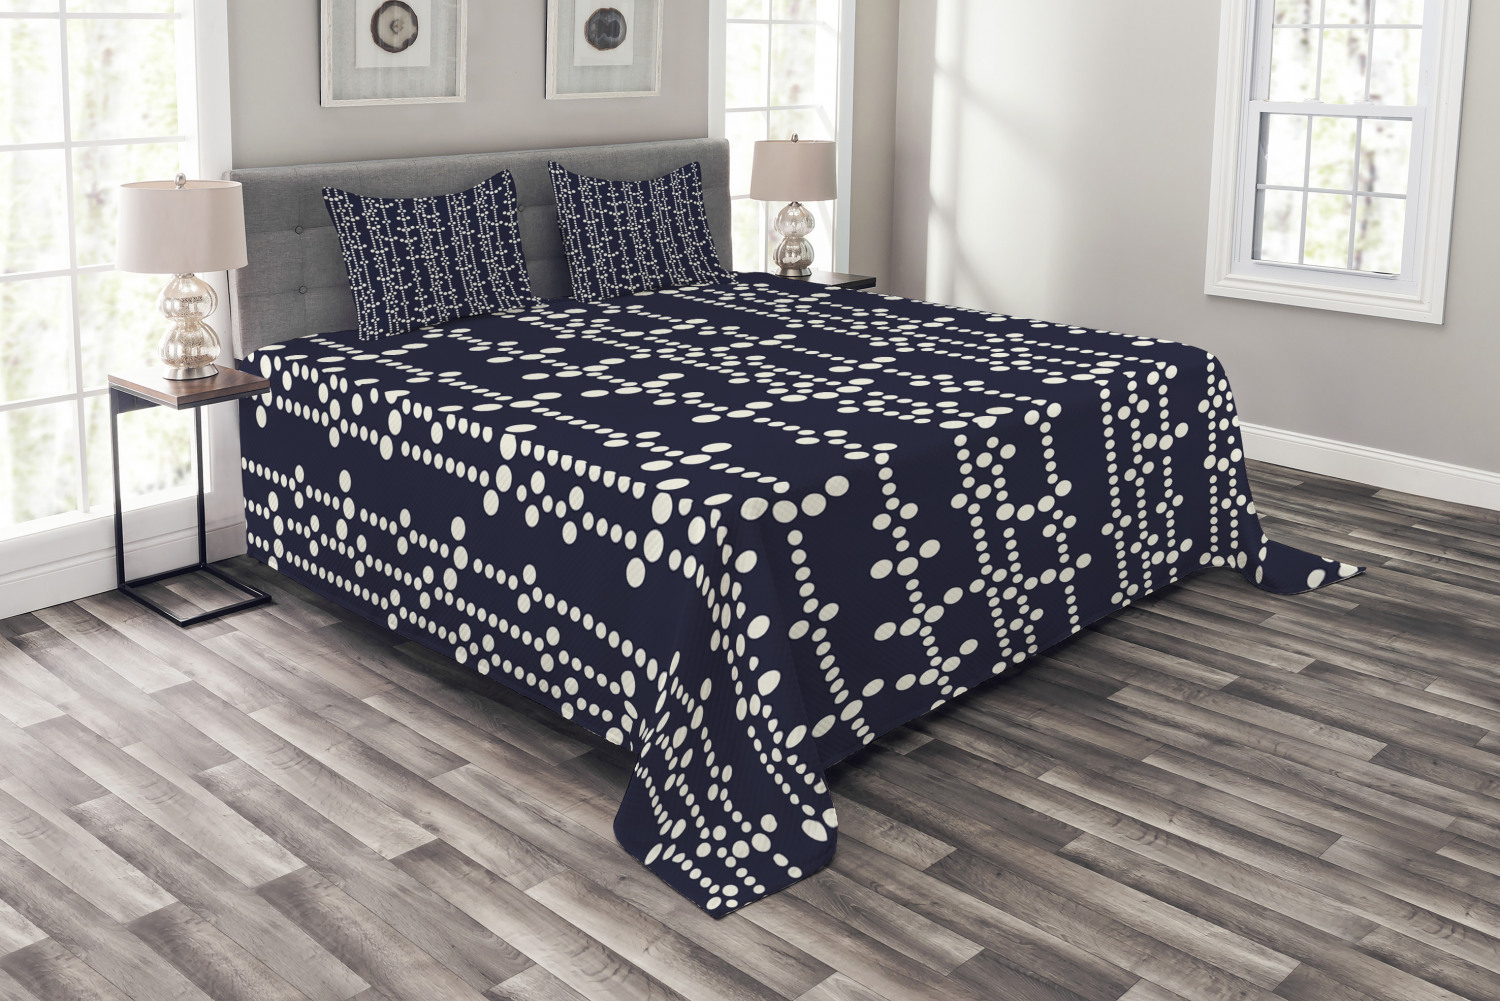 Geometric Quilted Bedspread & Pillow Shams Set Japanese Floor Style Print 